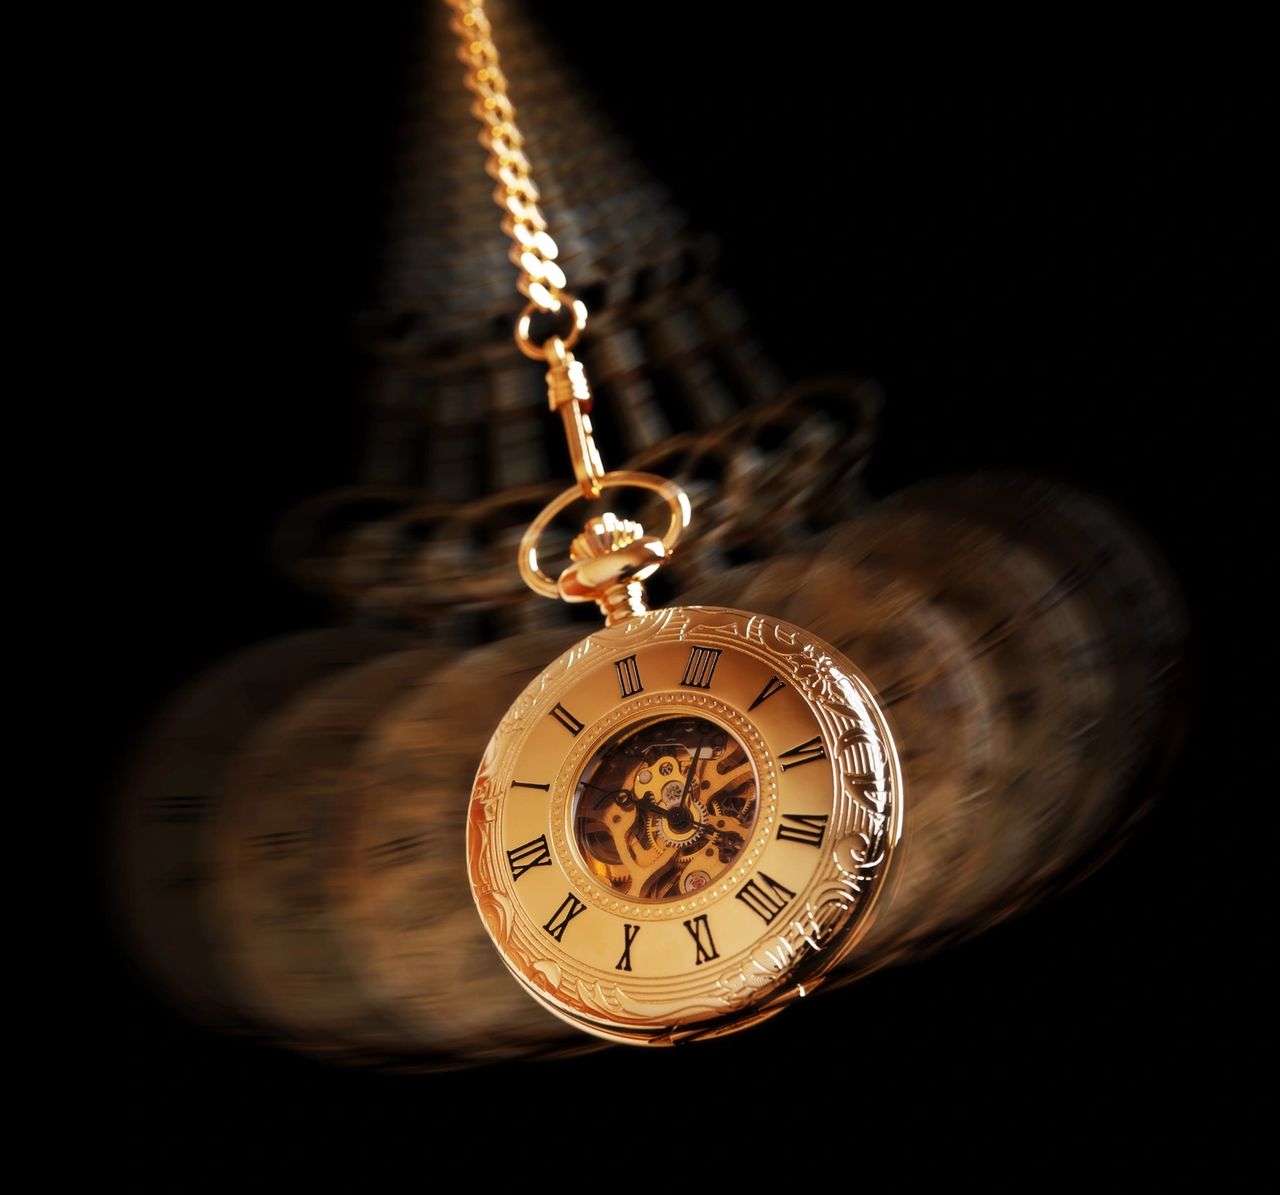 A gold pocket watch, with roman numerals, is swinging against a black background.